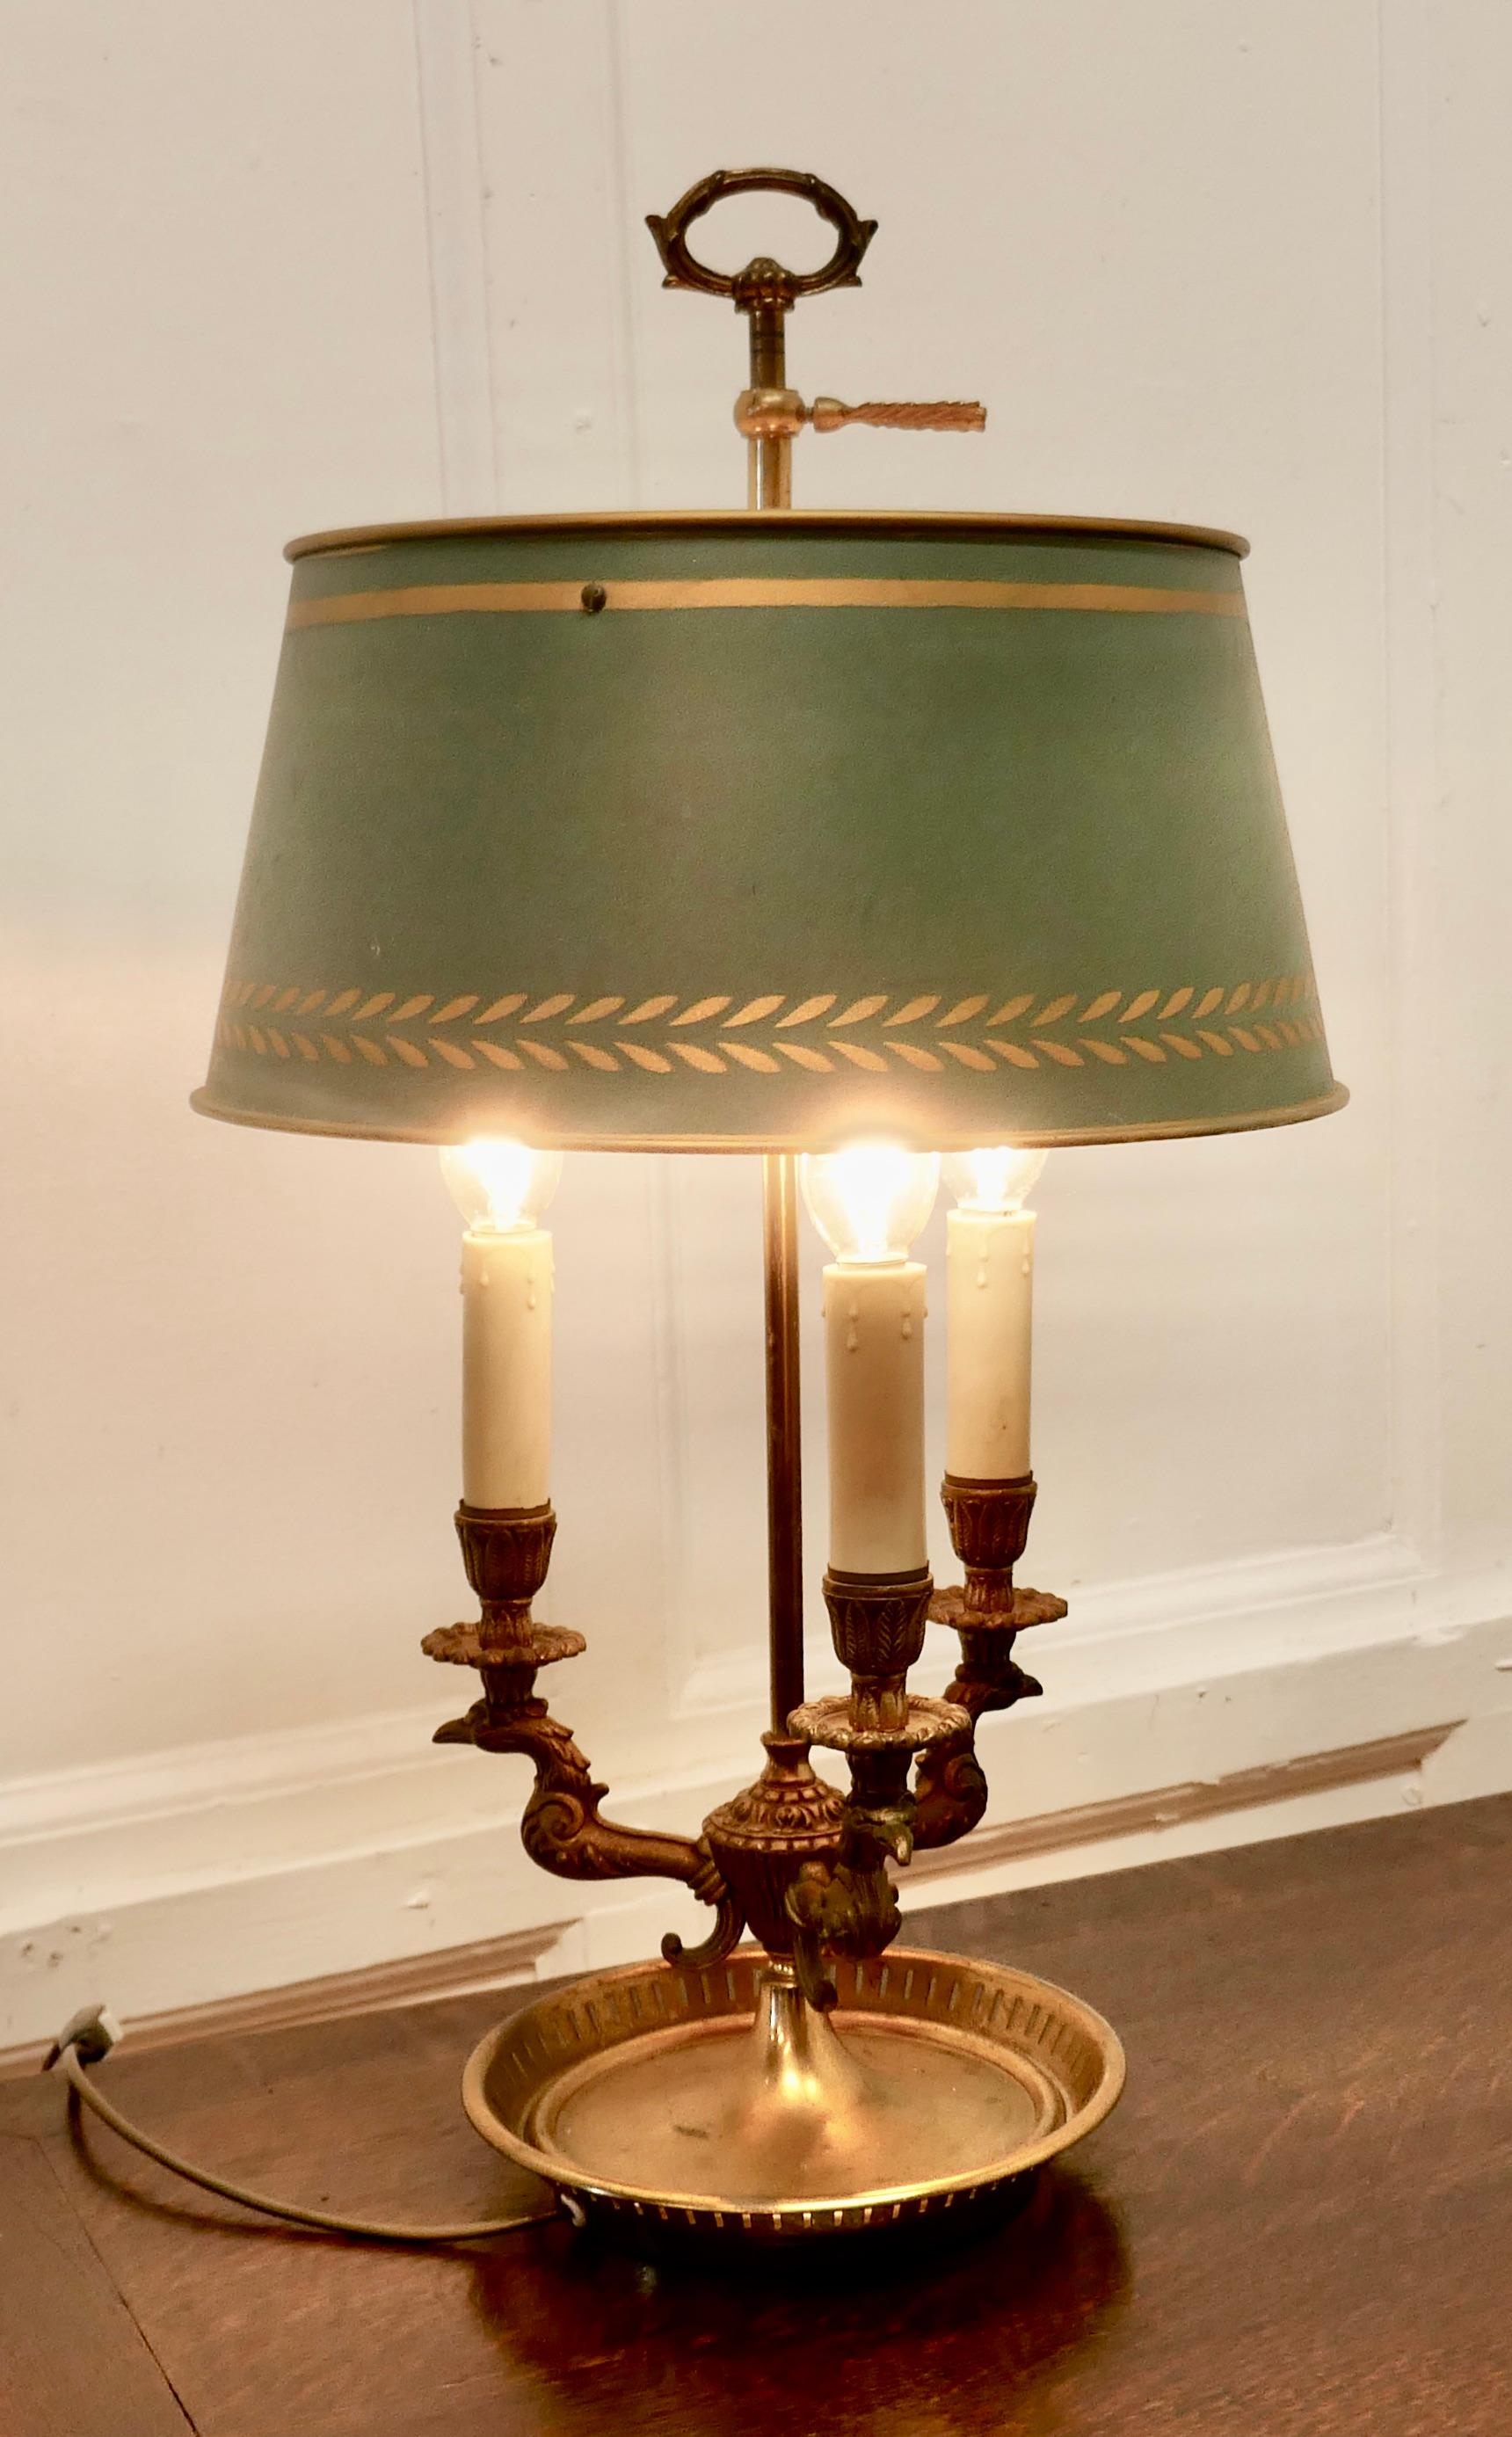 French Painted Toleware and Brass Triple Desk Lamp

A lovely piece, a brass triple sconce lamp with its original adjustable toleware shade 
A Very traditional design with three heads of a large bird presumably those who provide the quills and the